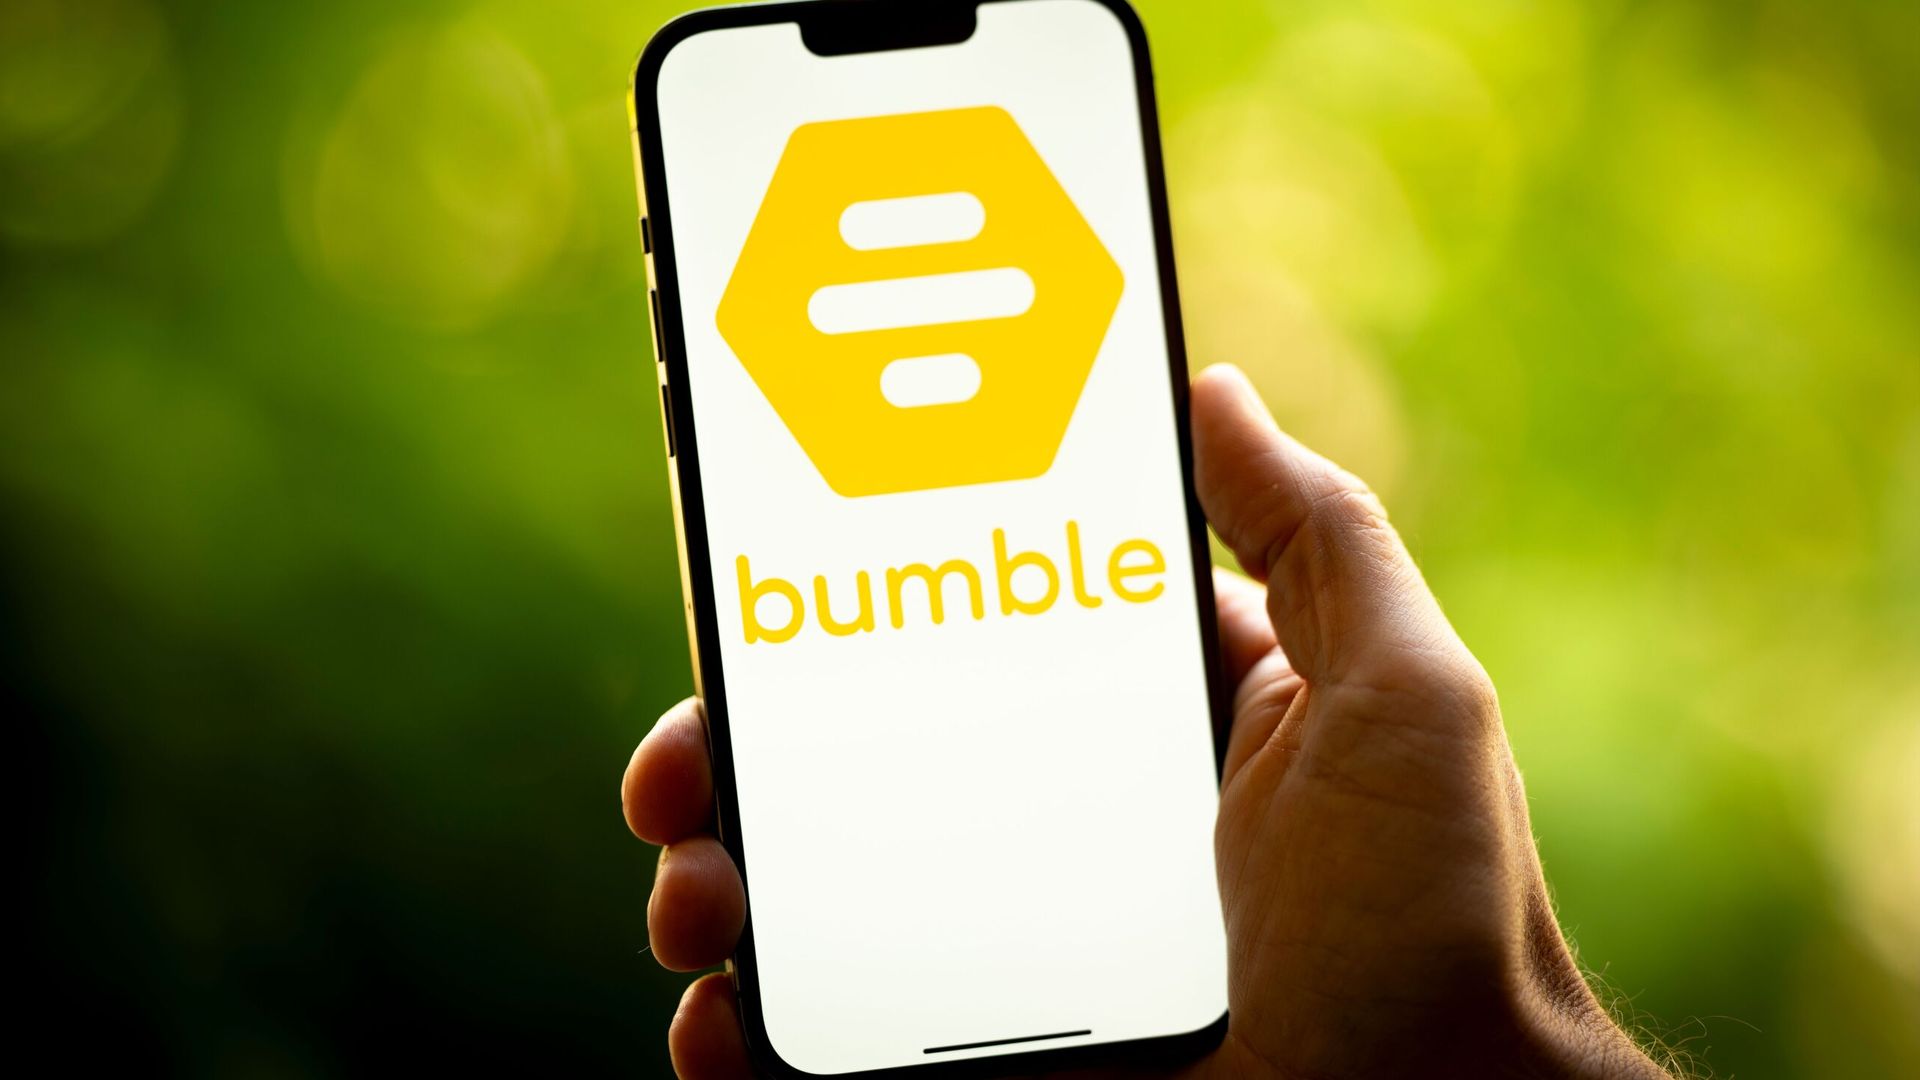 'Unbelievably insulting': Bumble apologises for billboard ad campaign